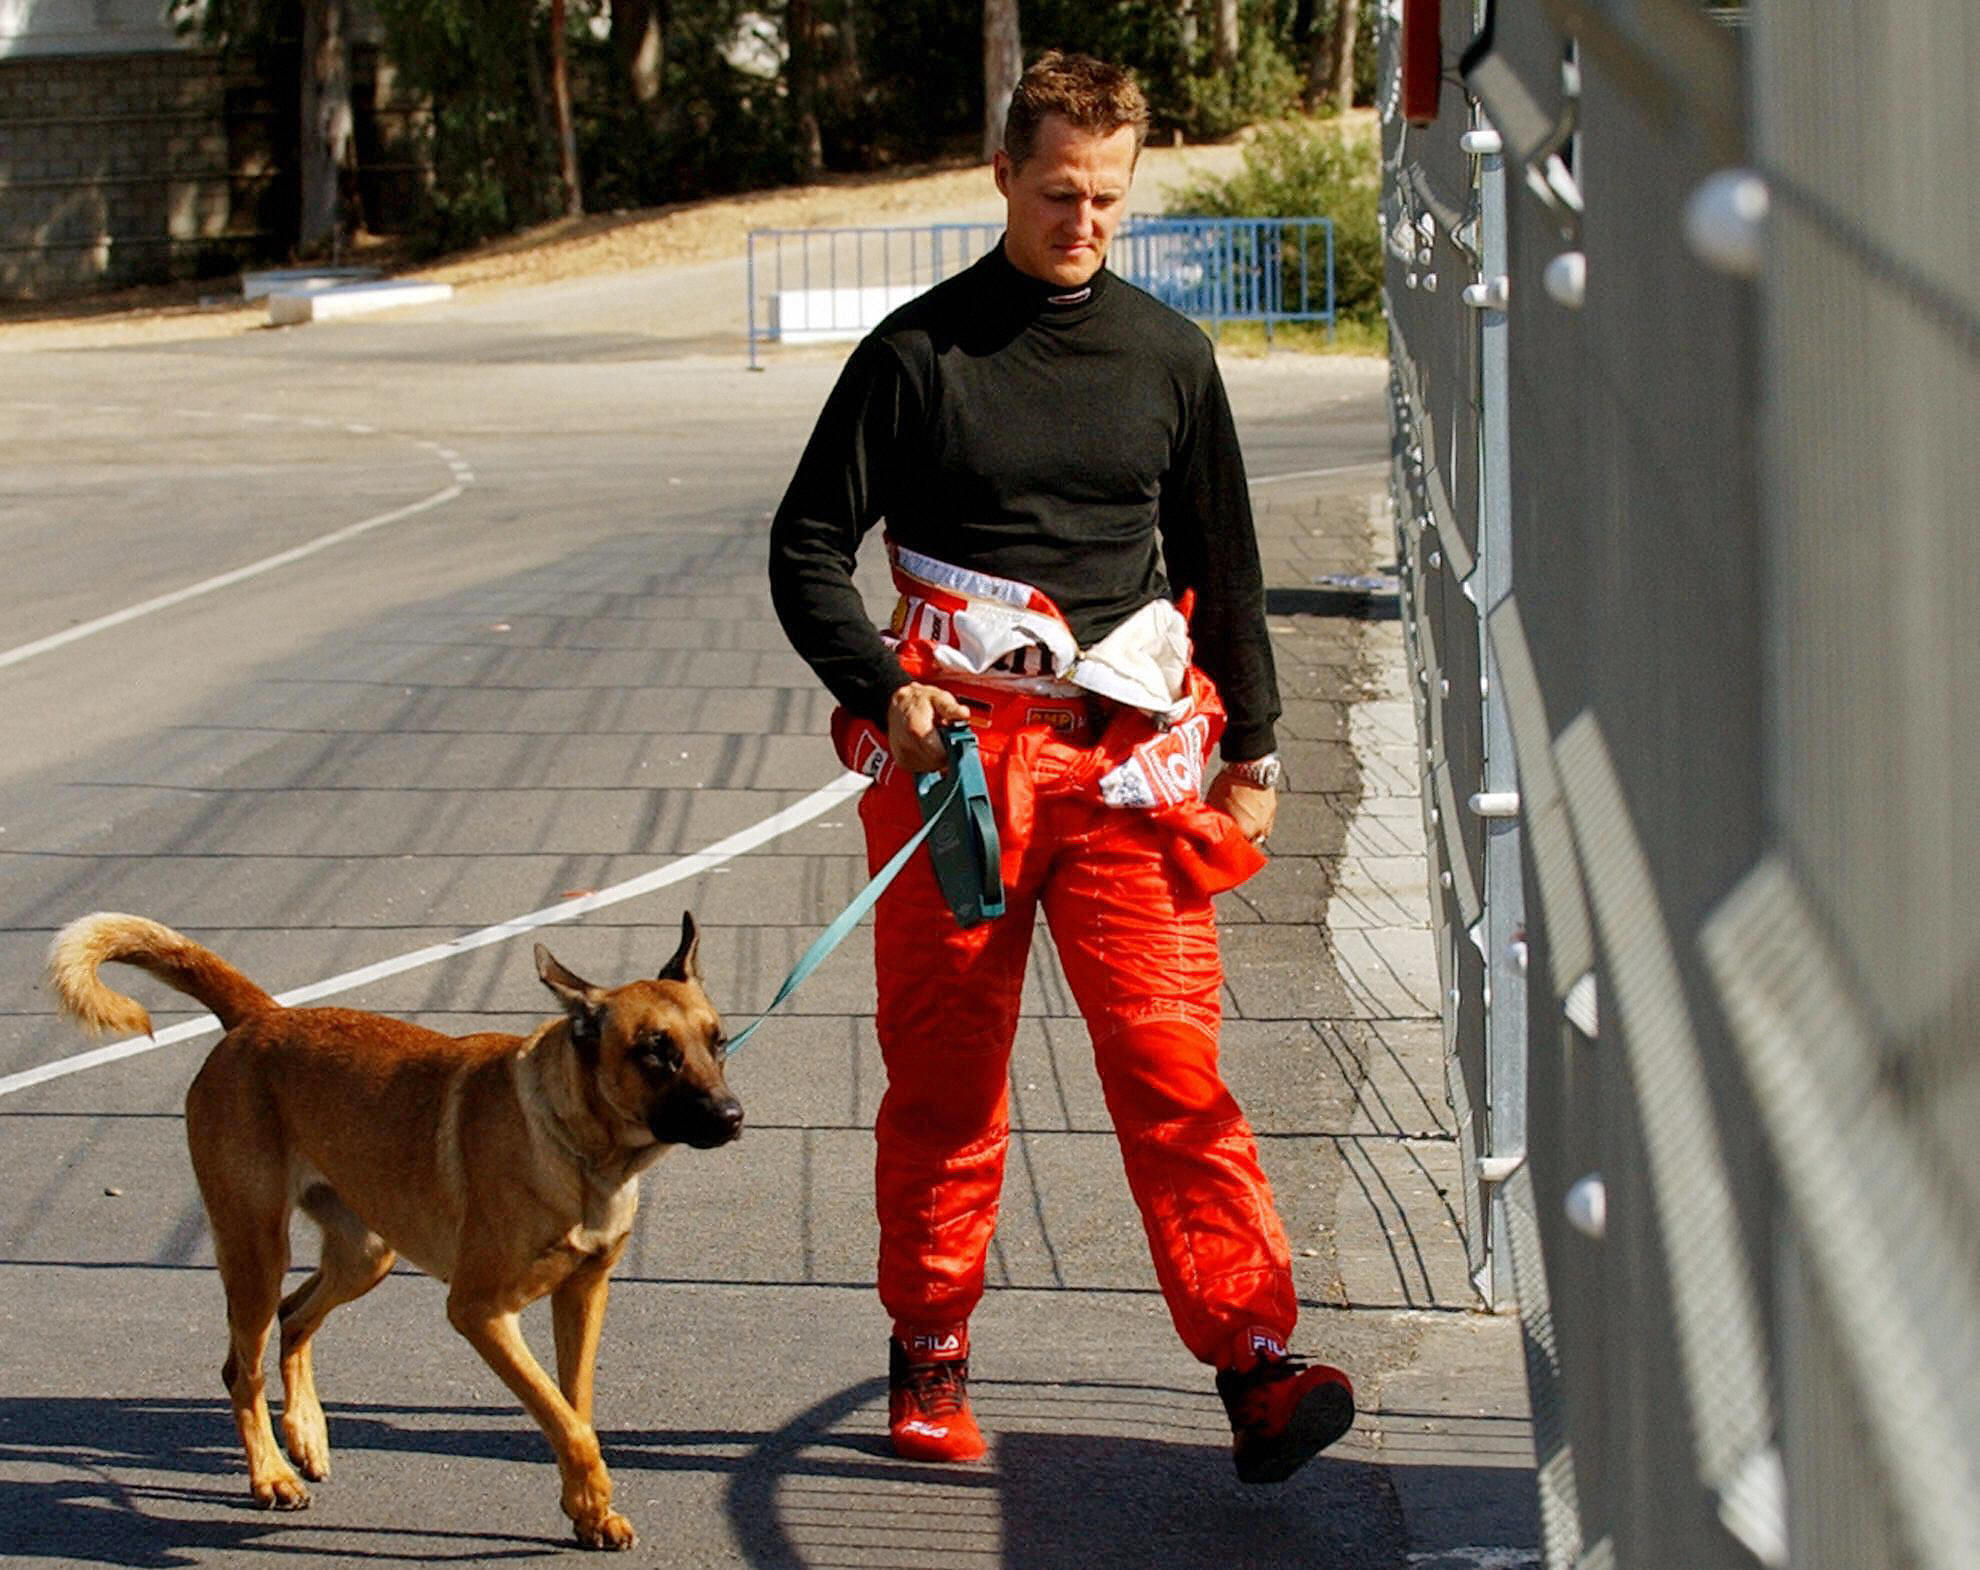 When 91 GP winner Michael Schumacher adopted a stray dog he met during the Brazilian Grand Prix